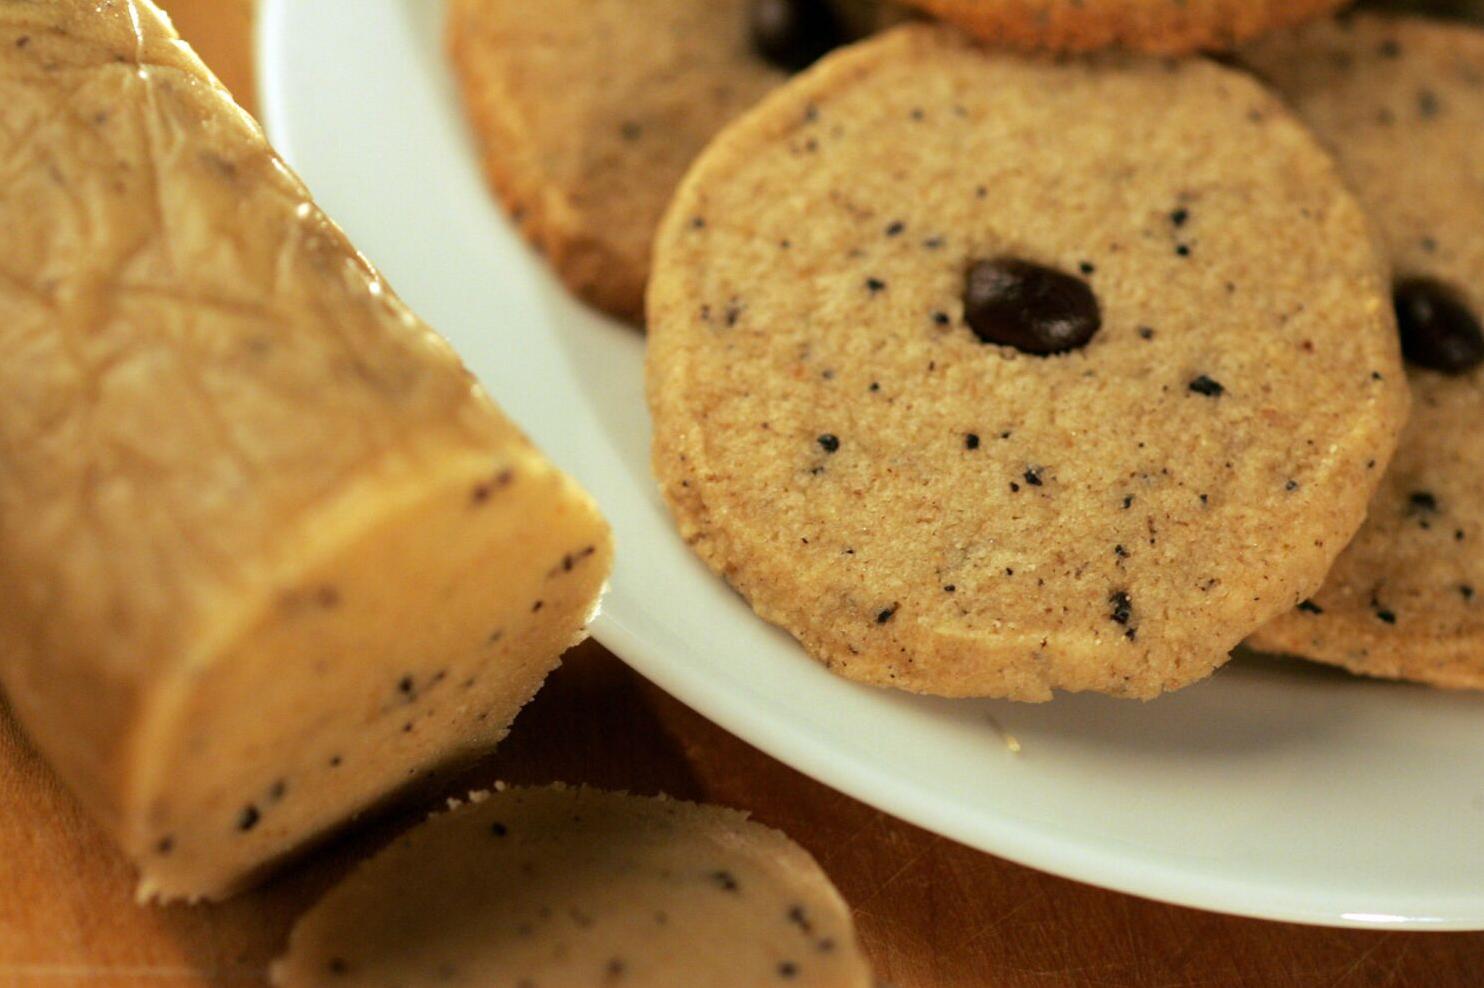  When coffee meets cookies, it's a match made in heaven!